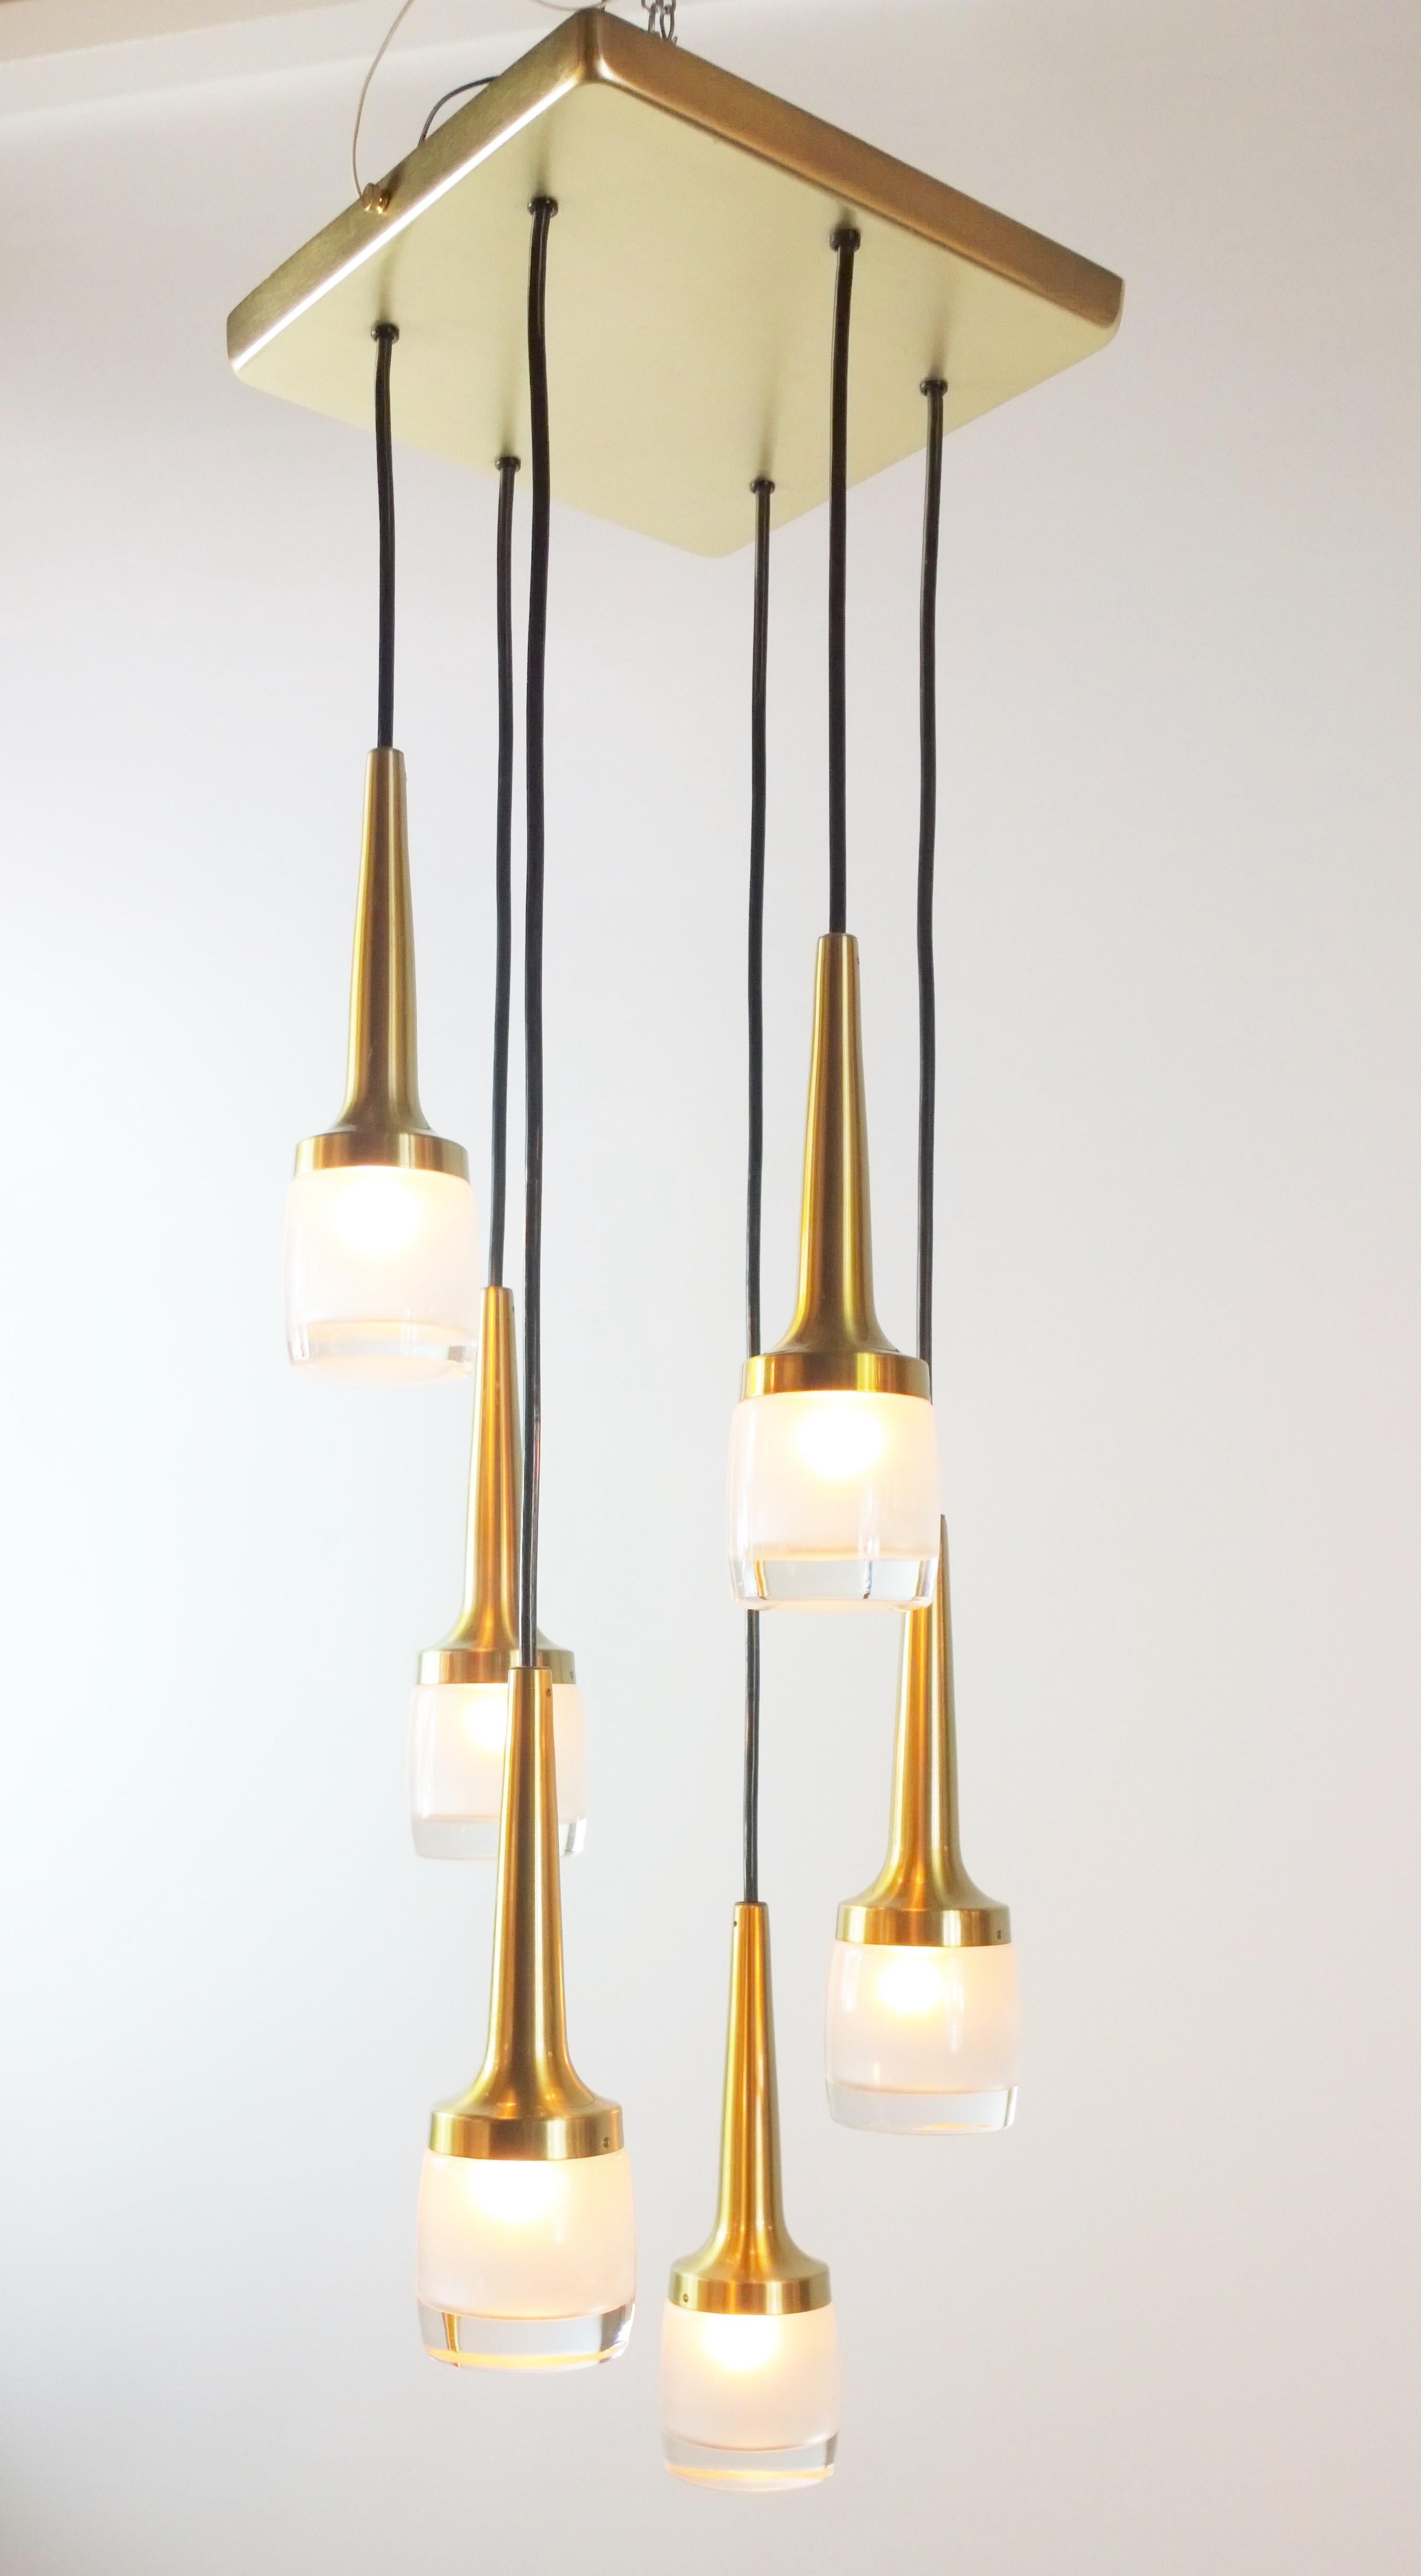 Offered is a Mid-Century Modern German Staff Leuchten six pendant molded glass and brass pendant attached by rubber cord to a brass ceiling plate chandelier. This modern, streamlined yet elegant chandelier would look fabulous with any decor and in